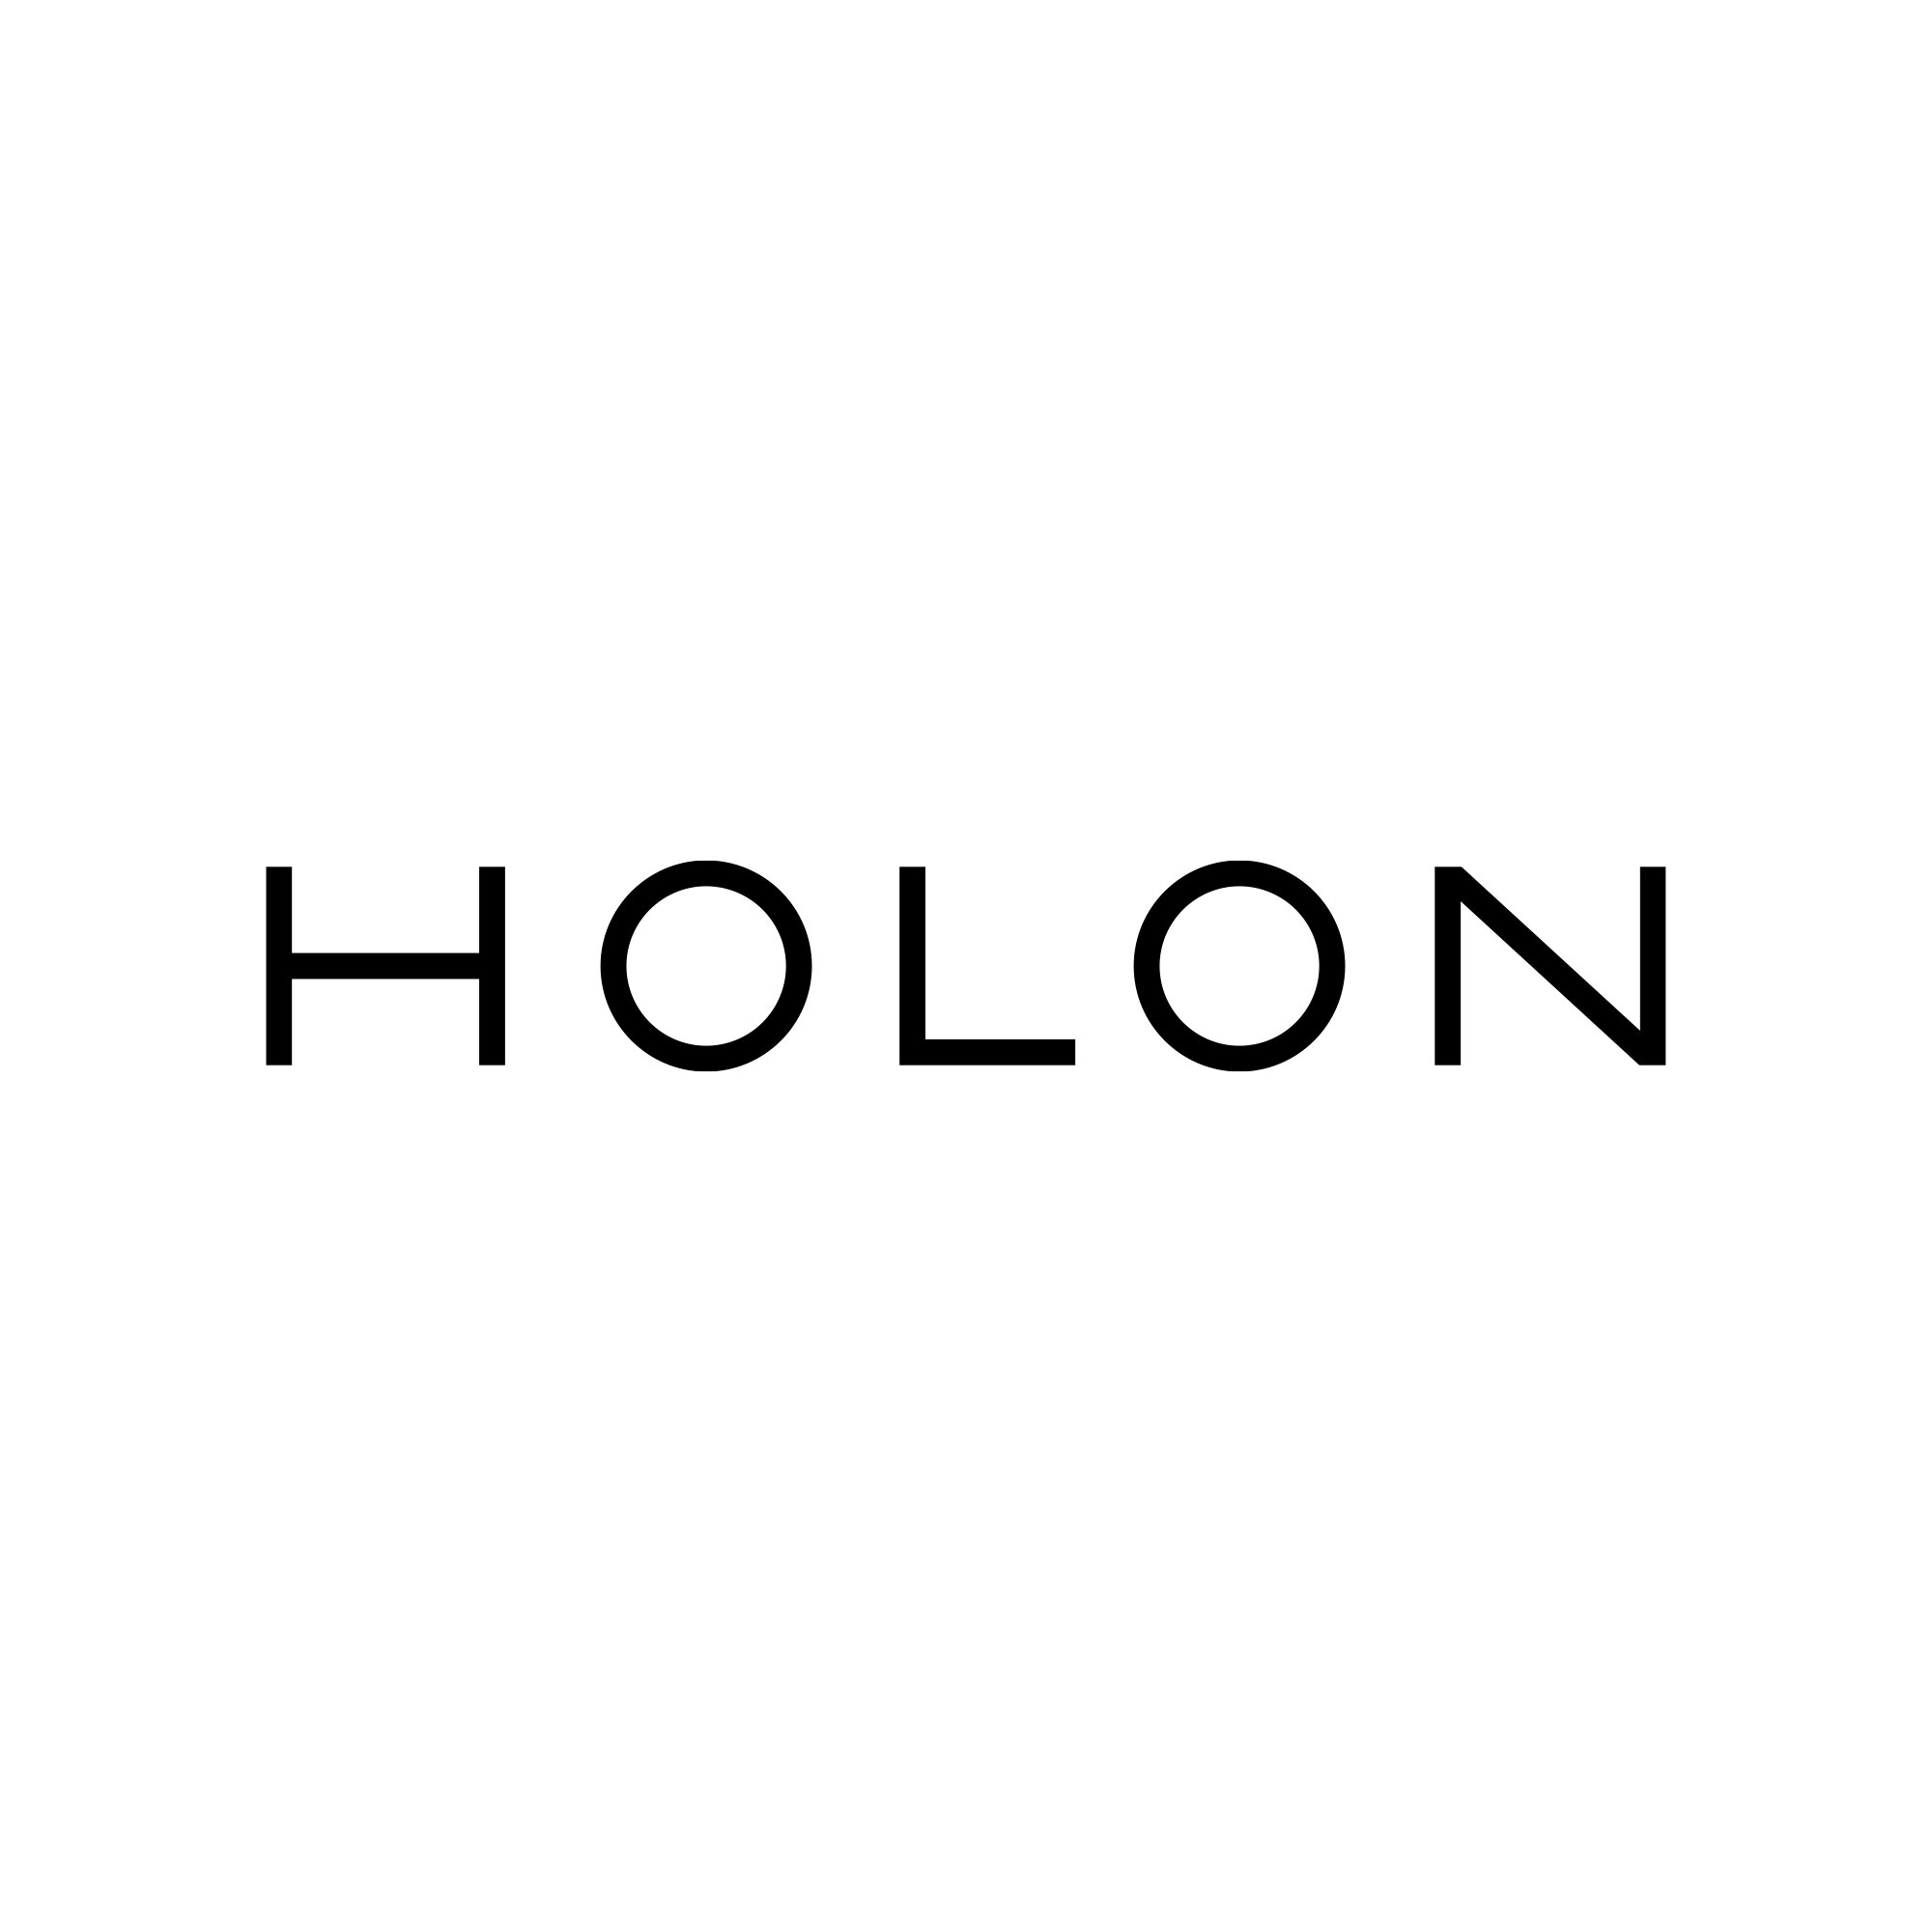 HOLON Coupons & Promo Codes